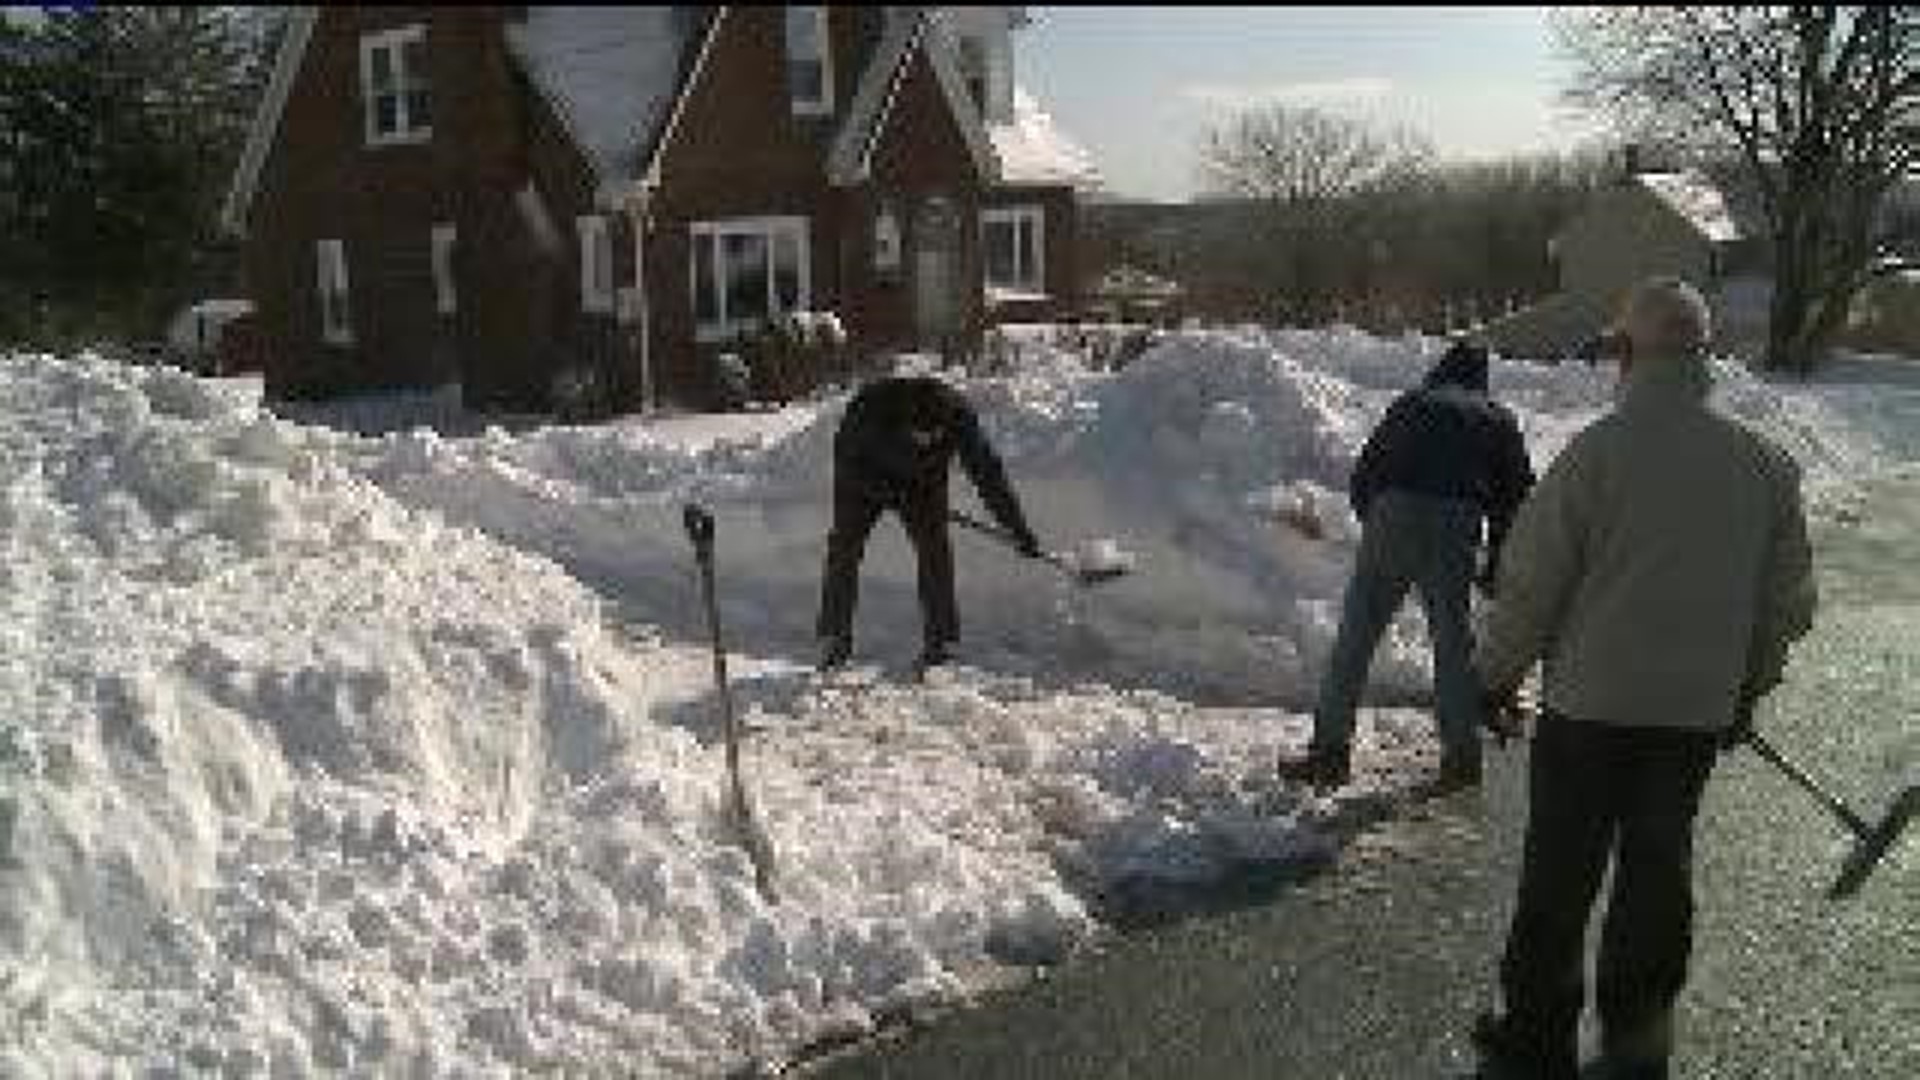 Shoveling, Plowing and Throwing the Snow